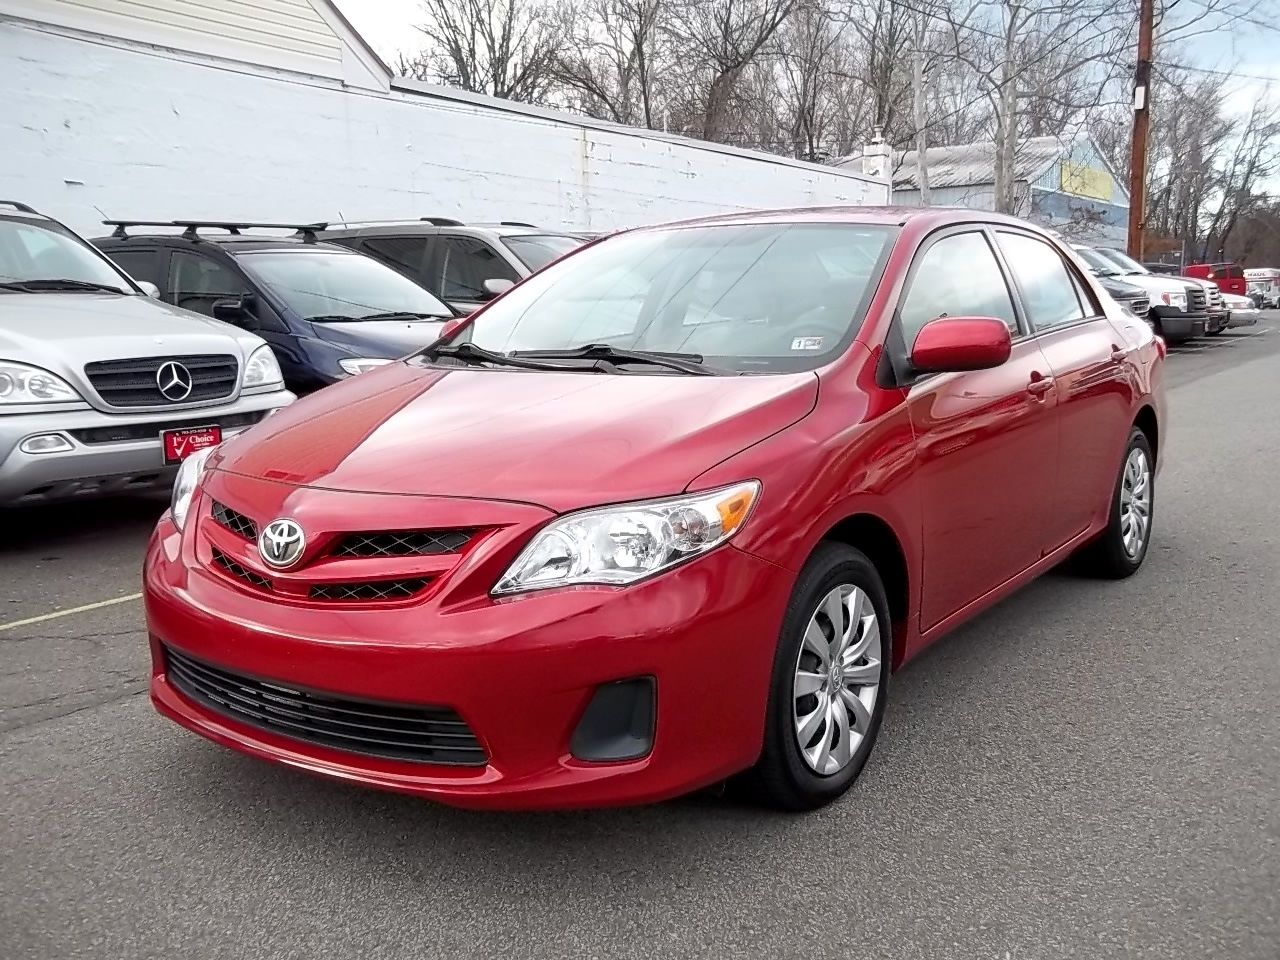 Used 2012 Toyota Corolla for Sale in Bryans Road, MD | Cars.com